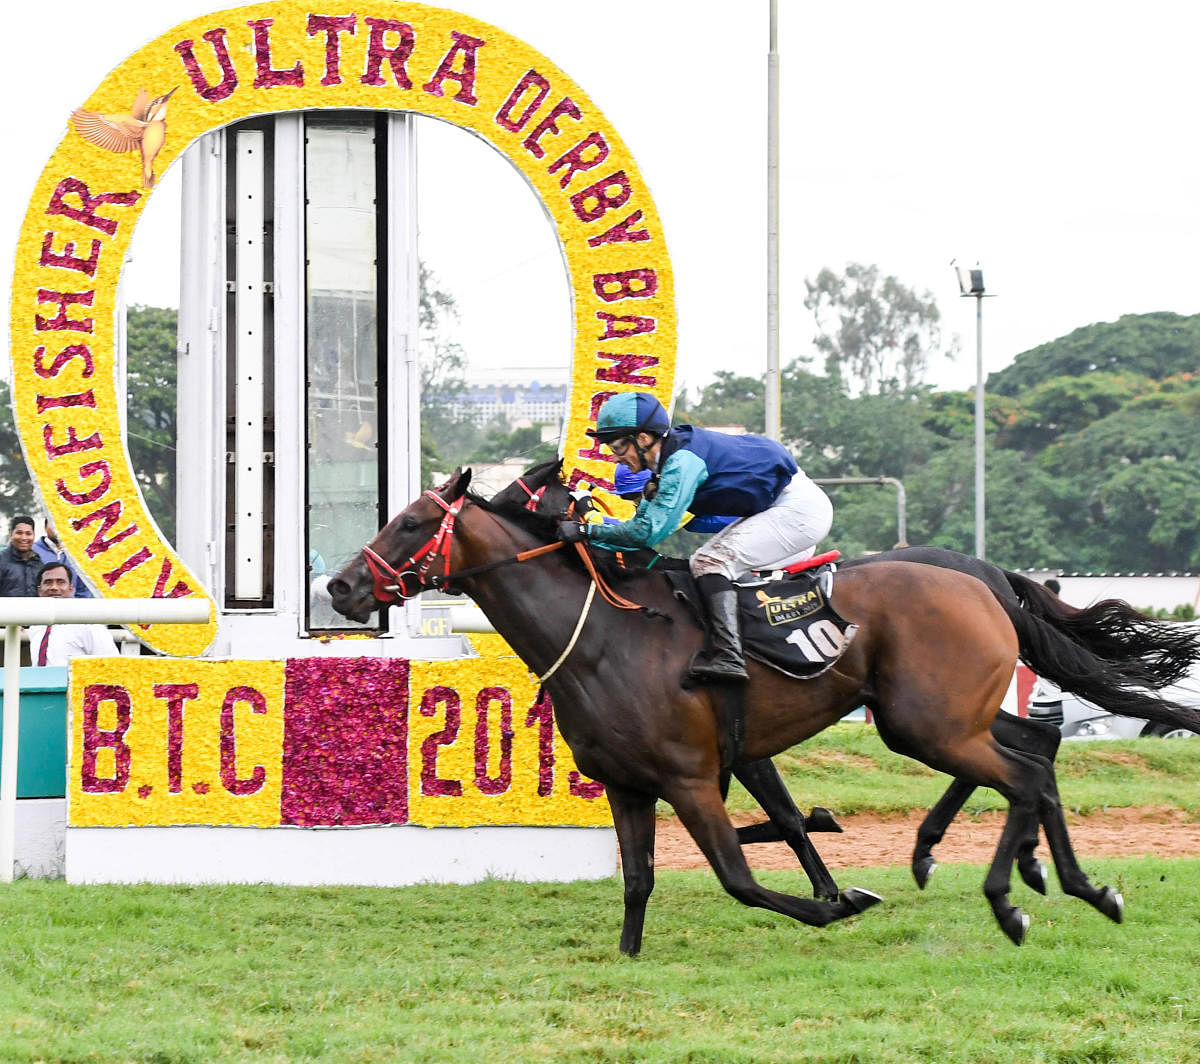 TENSE CLIMAX: Jockey David Allan pilots Well Connected to a thrilling win over Impavid (back) in the Kingfisher Ulta Derby Bangalore at the Bangalore Turf Club on Sunday. dh photo/ BH SHIVAKUMAR  